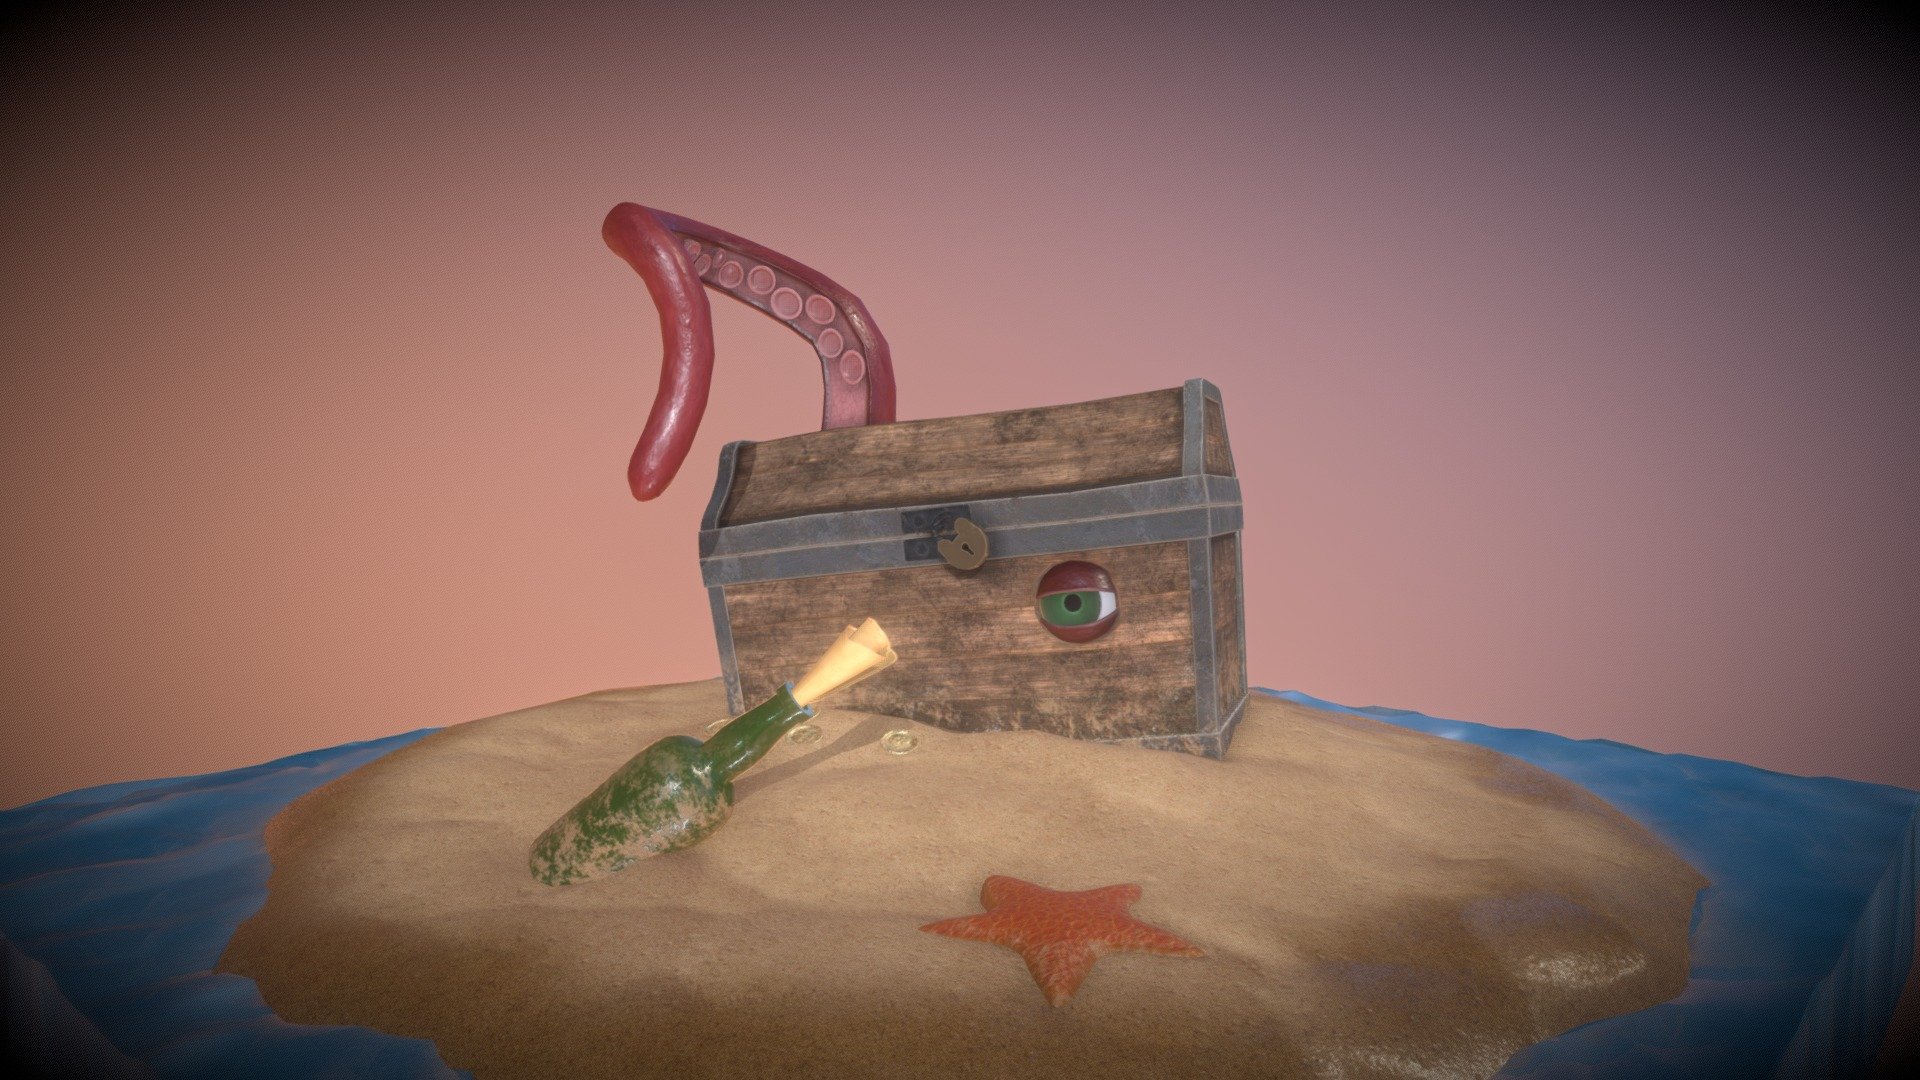 Created for a Monthly Art Challenge at work.

Modeled and animated in Autodesk Maya, Textured in Substance Painter. 

Animated with a basic rig on the eye then used a curveWrap deformer to deform the tentacle intially, then used a sine wave on a blendshape of the guide curve to get a smooth movement 3d model